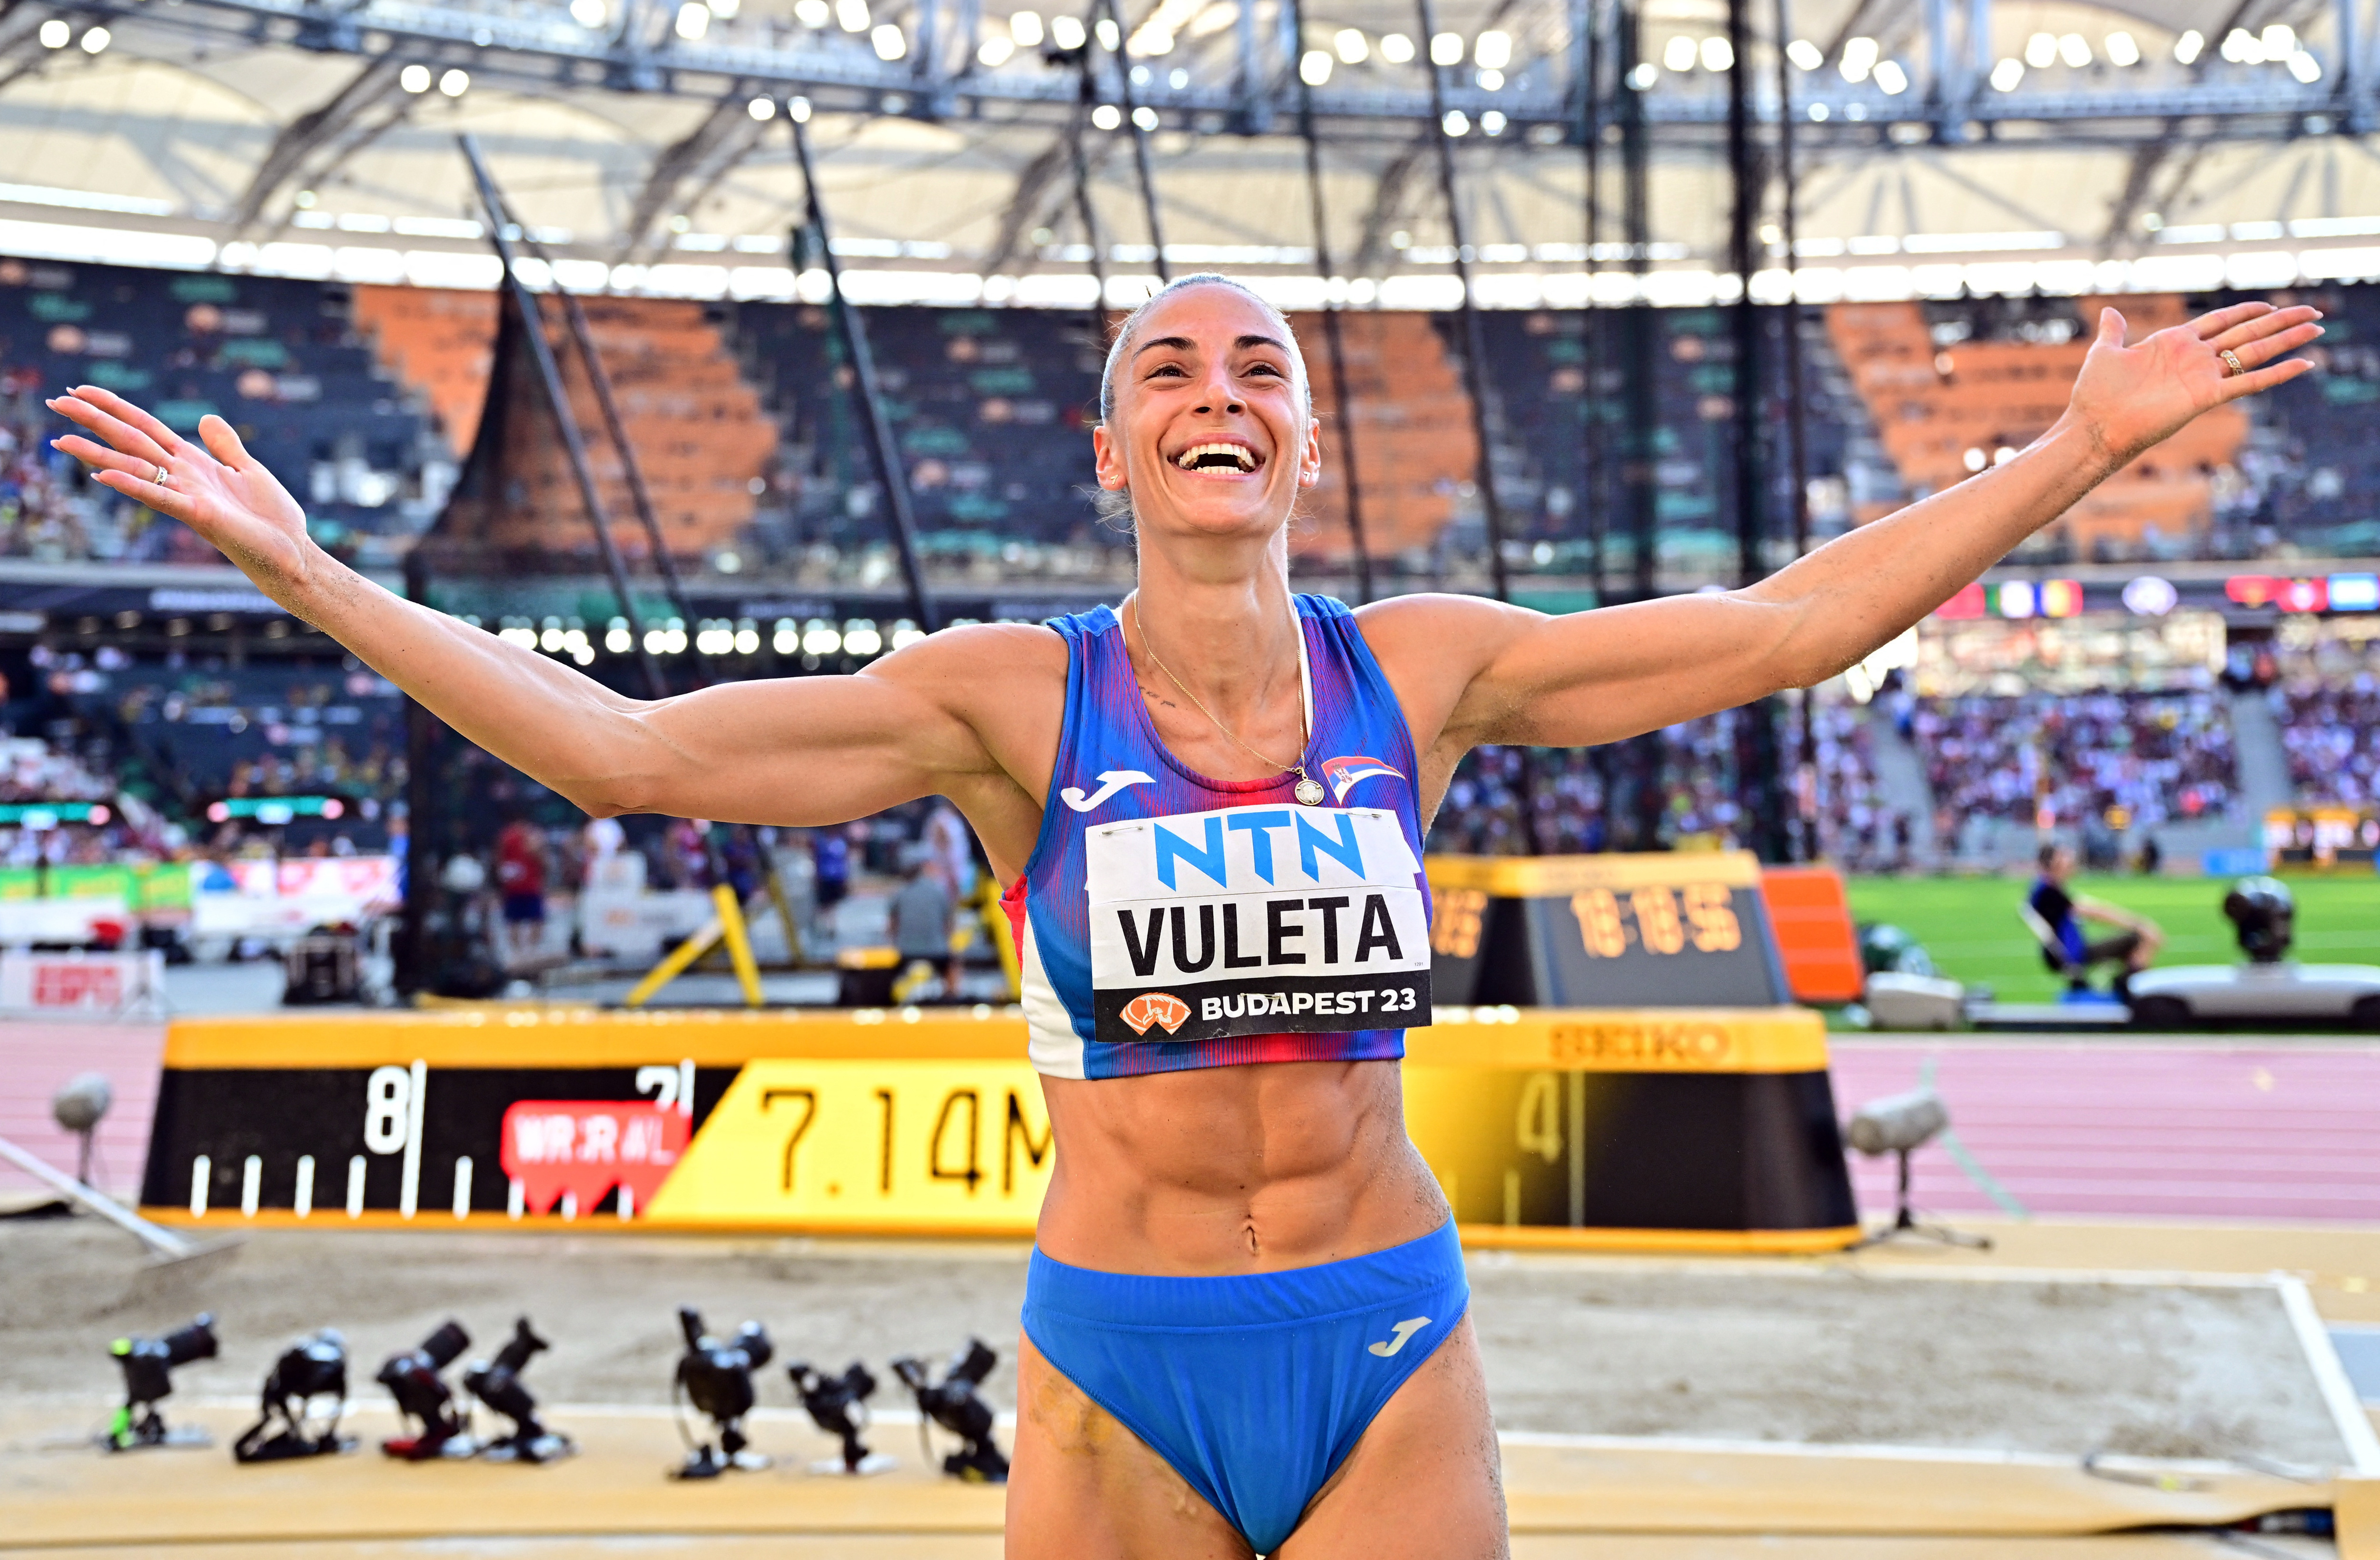 Serbia's Vuleta claims world long jump gold with season's best